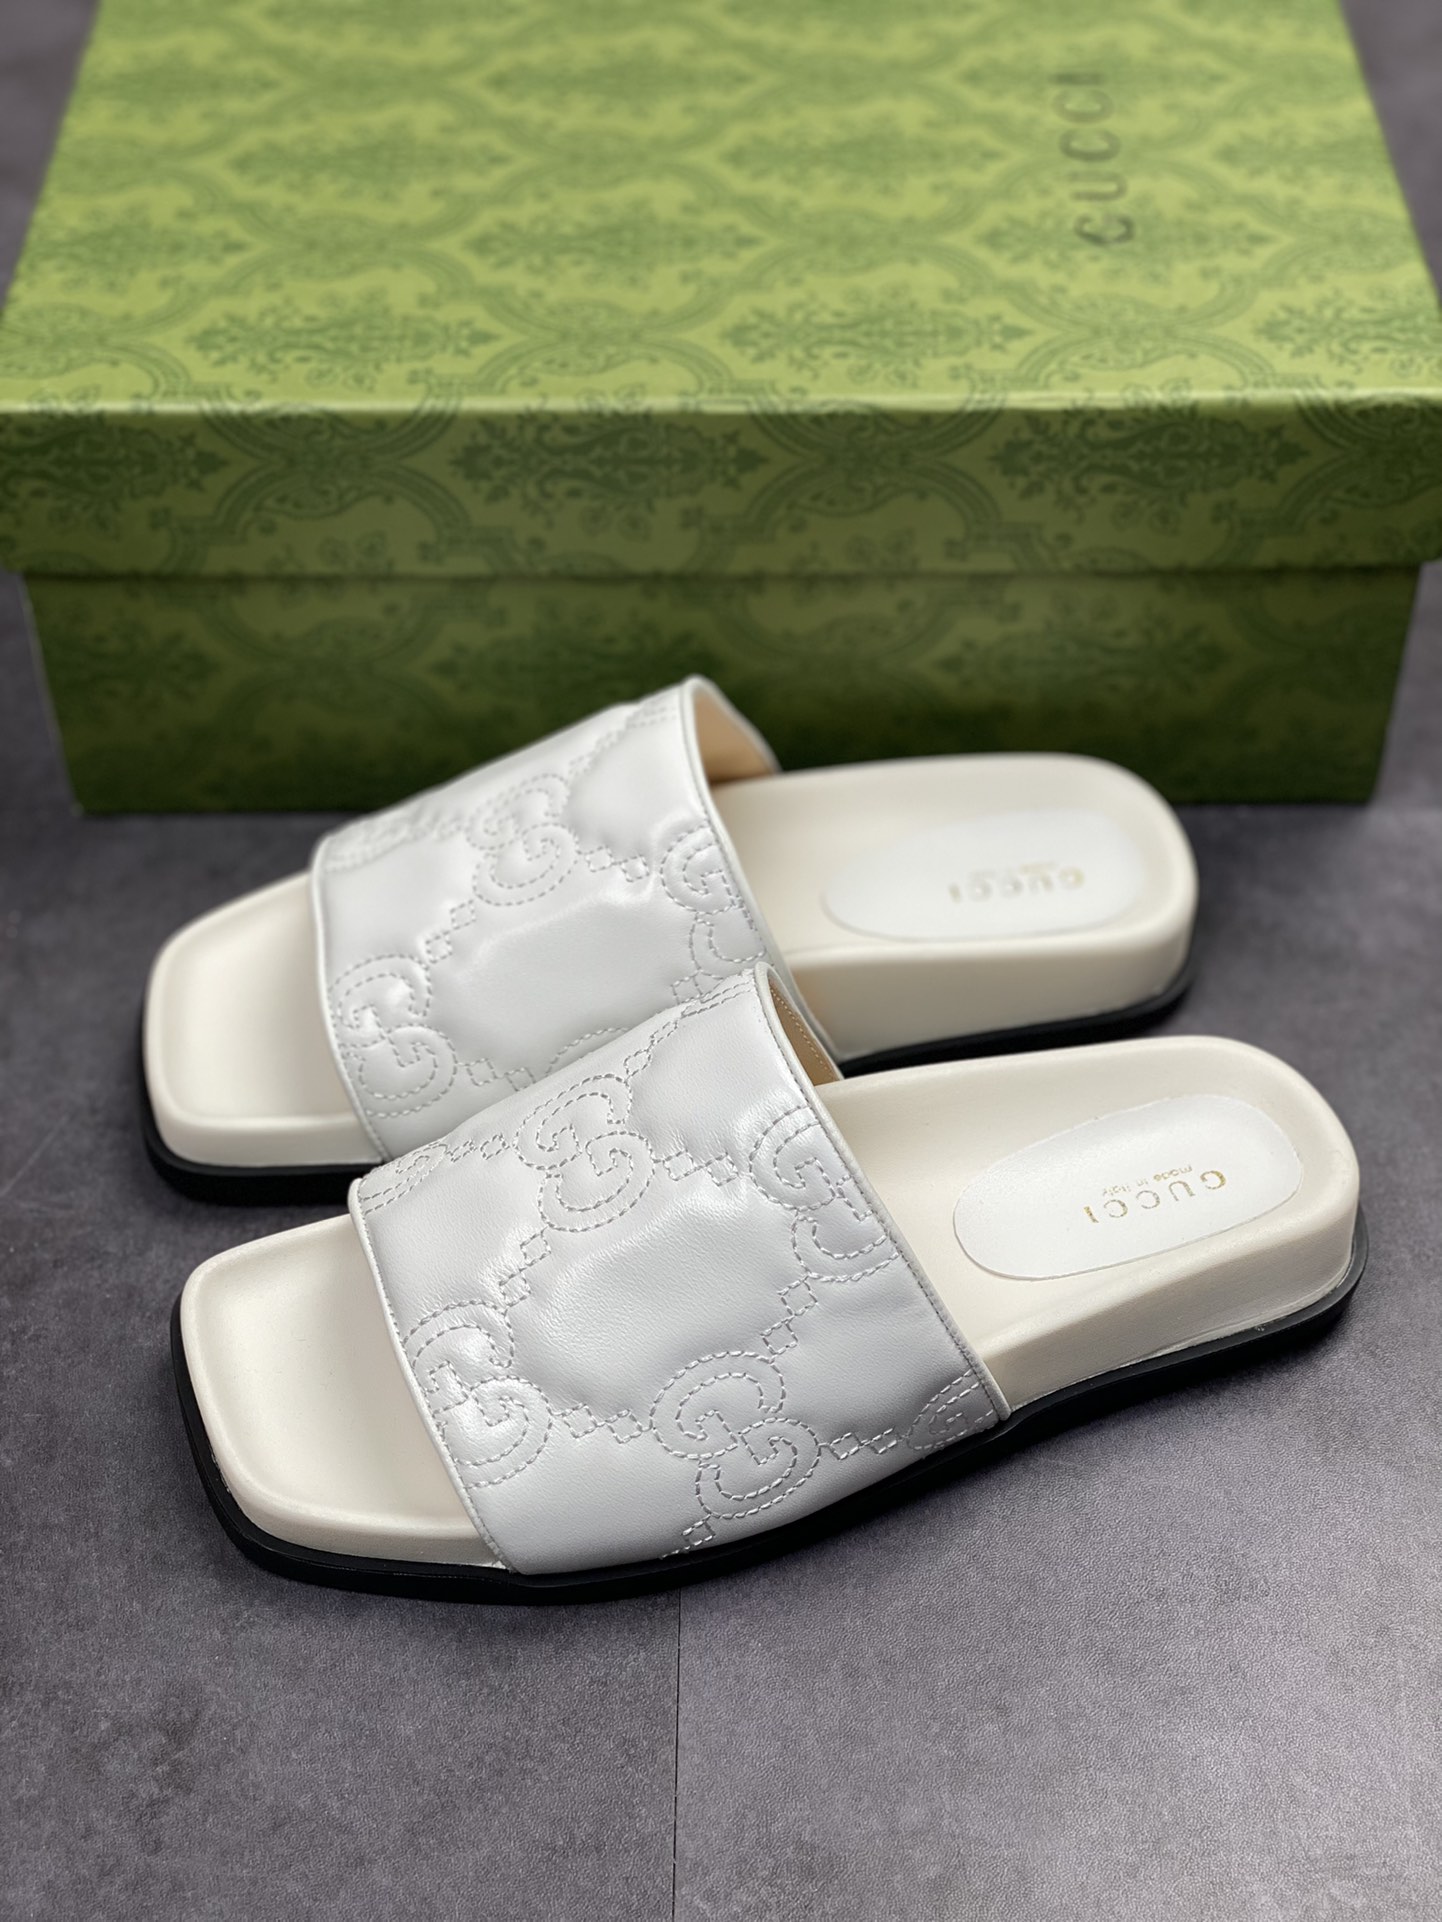 Gucci spring and summer sandals series classic styles